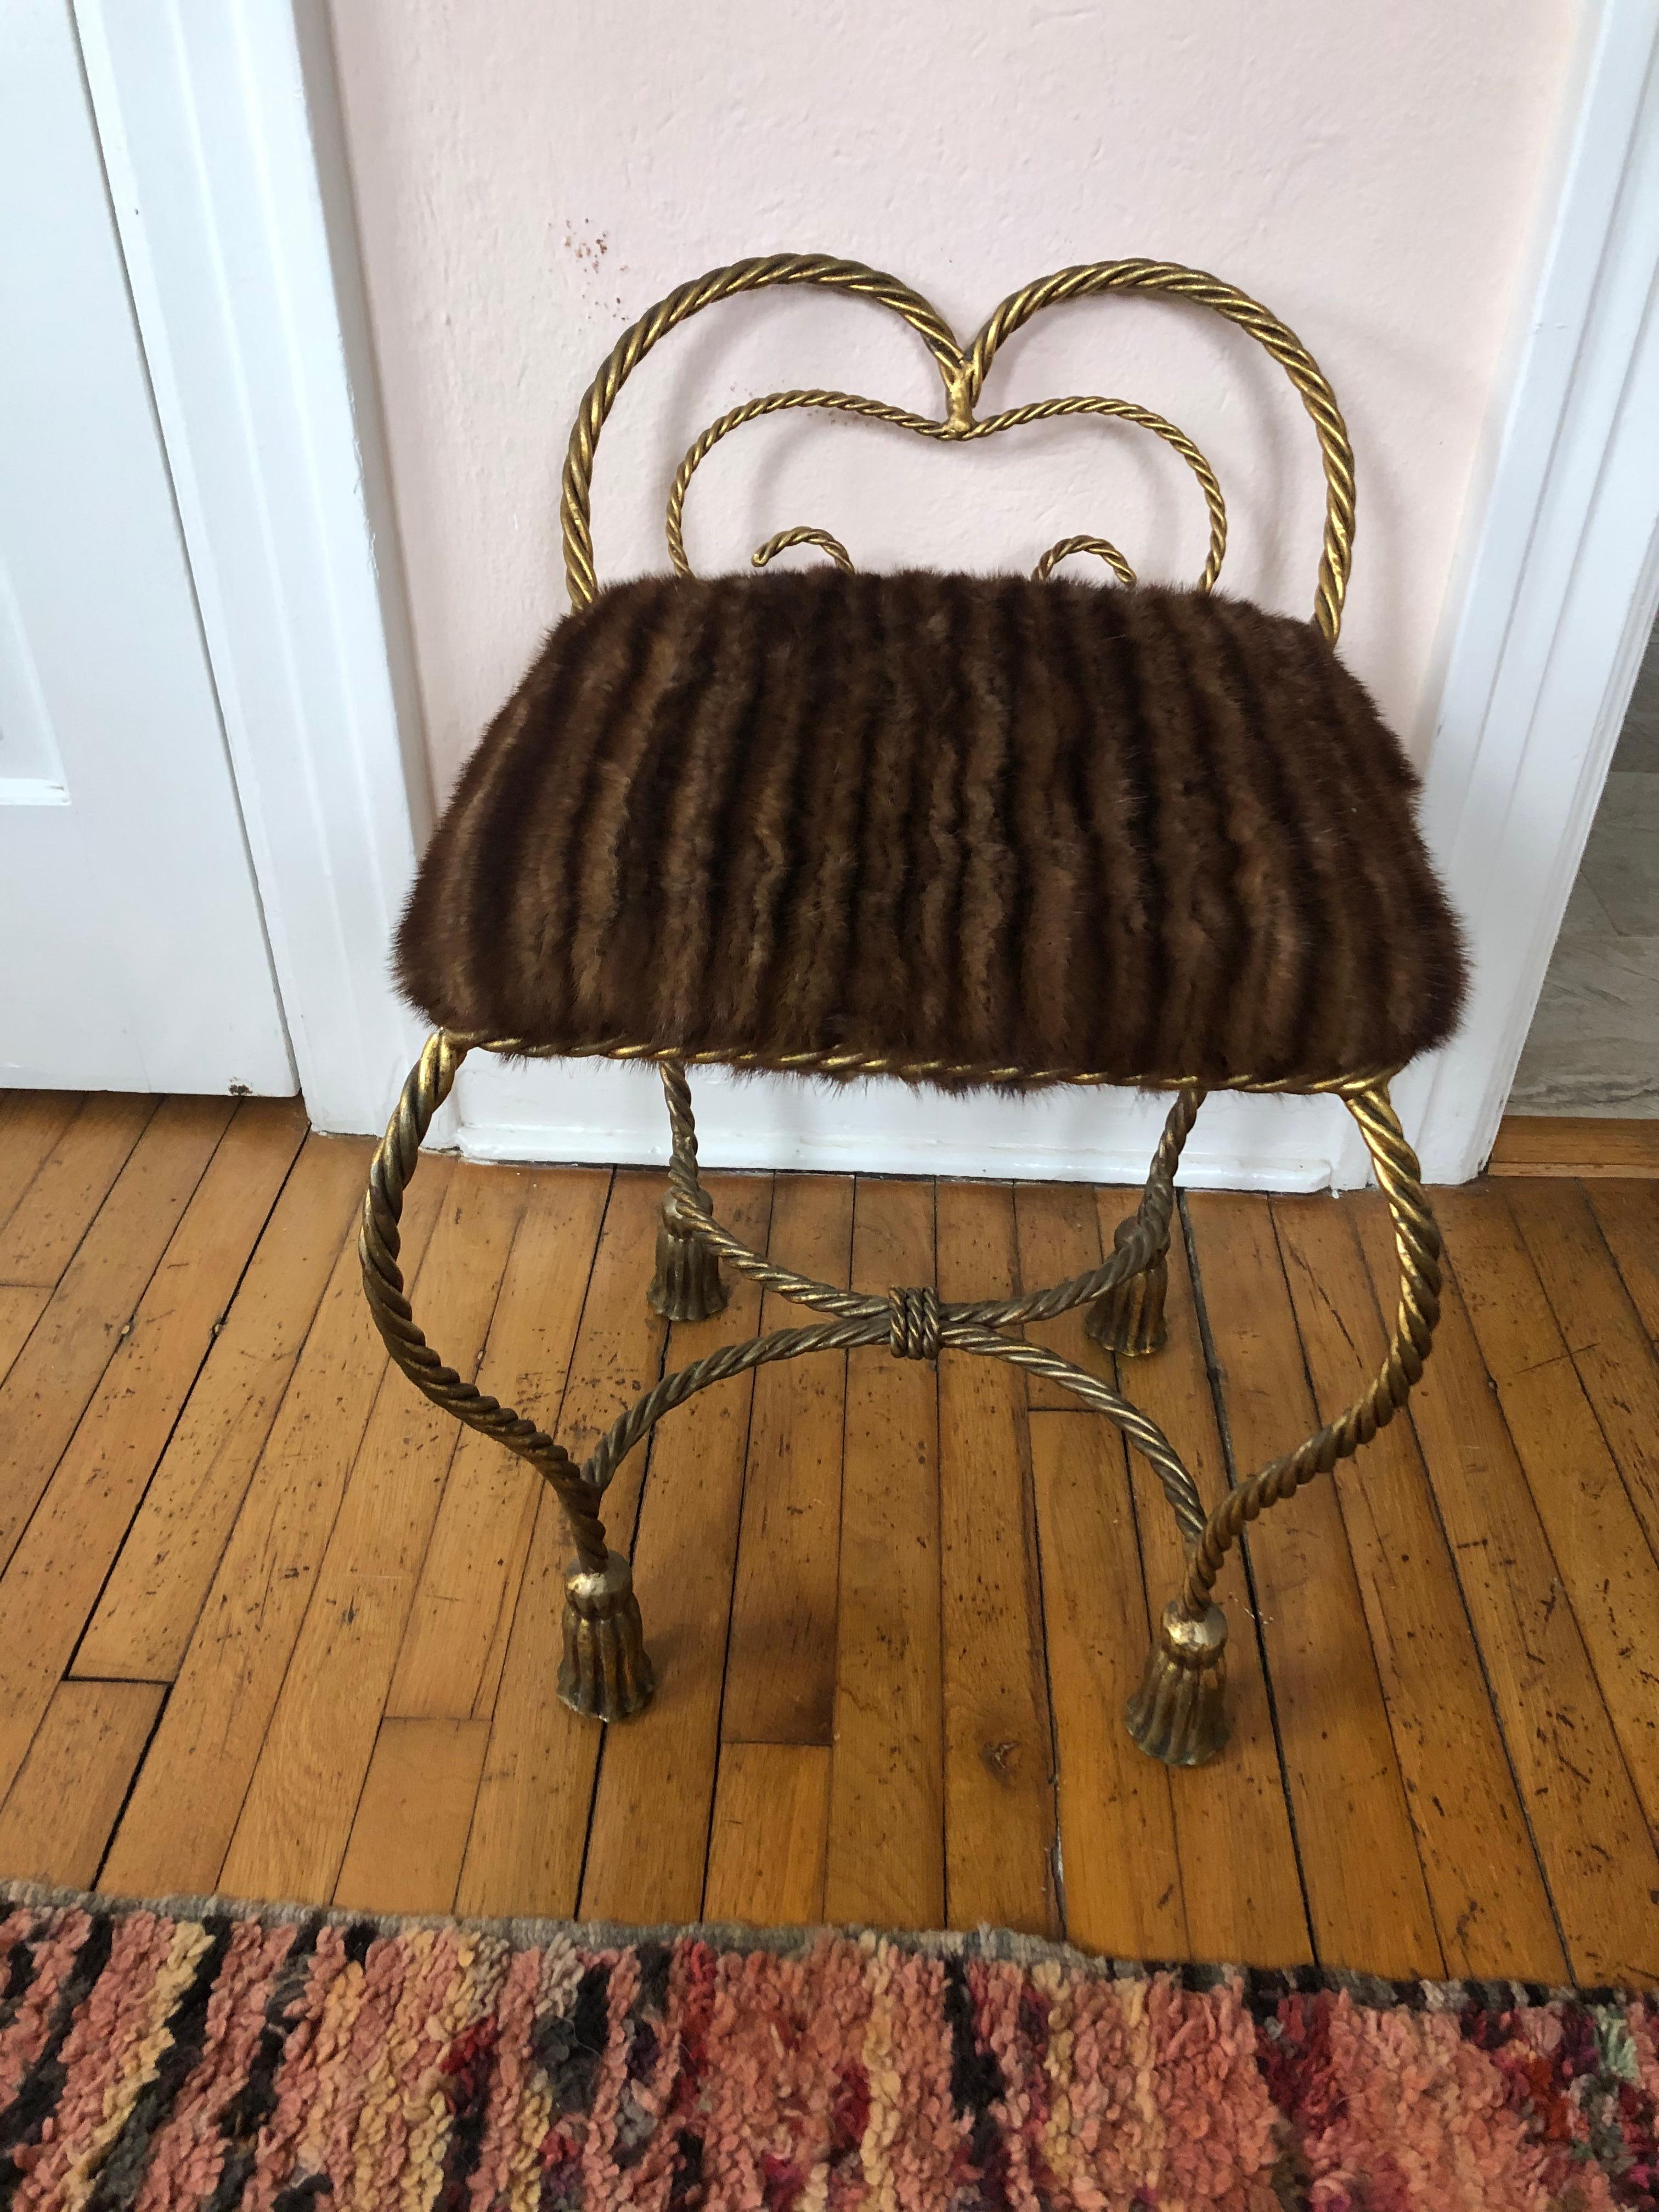 A movie star vintage Italian gilt iron rope and tassel motife boudoir bench or stool, beautifully upholstered in real mink fur. Makes a great little extra seat if used as a floating stool in a living room.